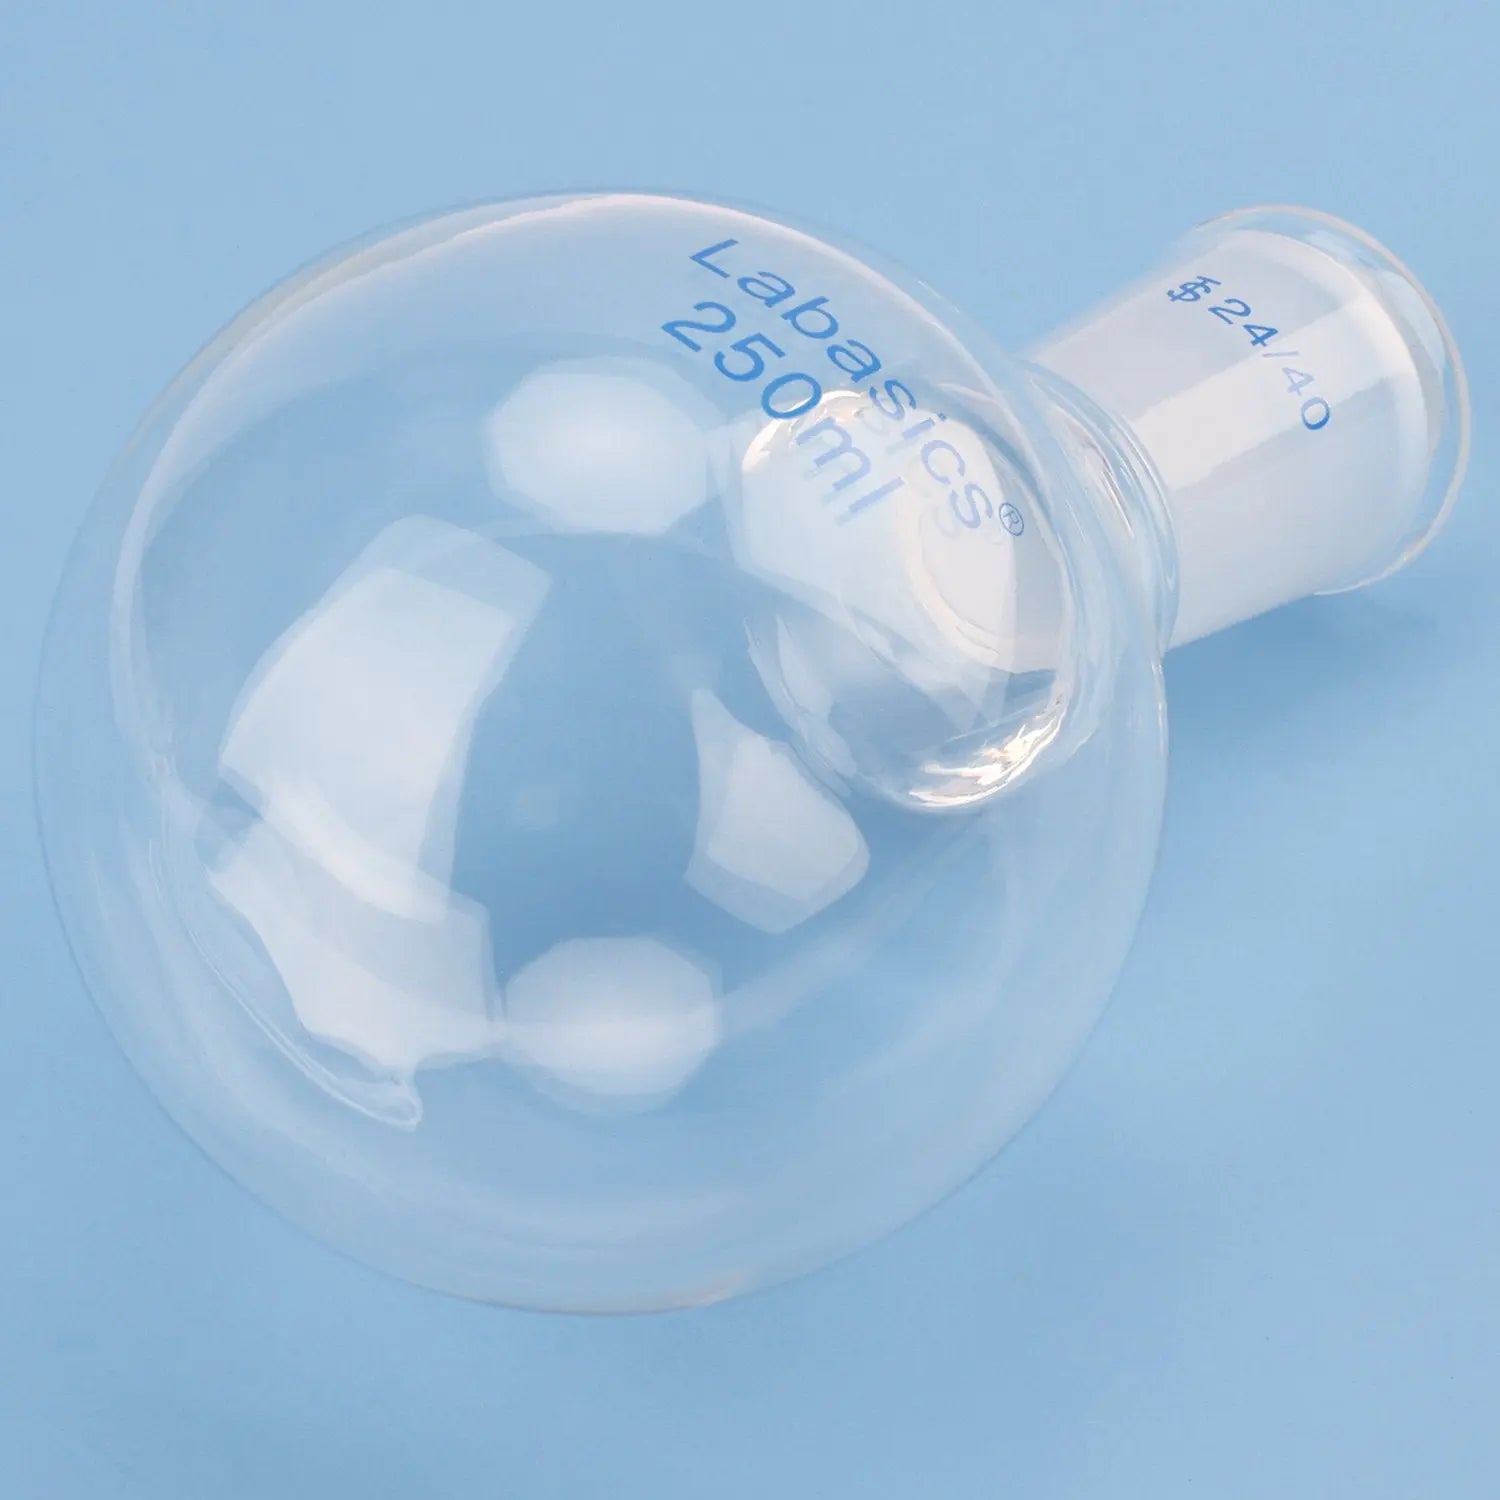 Glass Round Bottom Flask with 24/40 Standard Taper Outer Joint Labasics